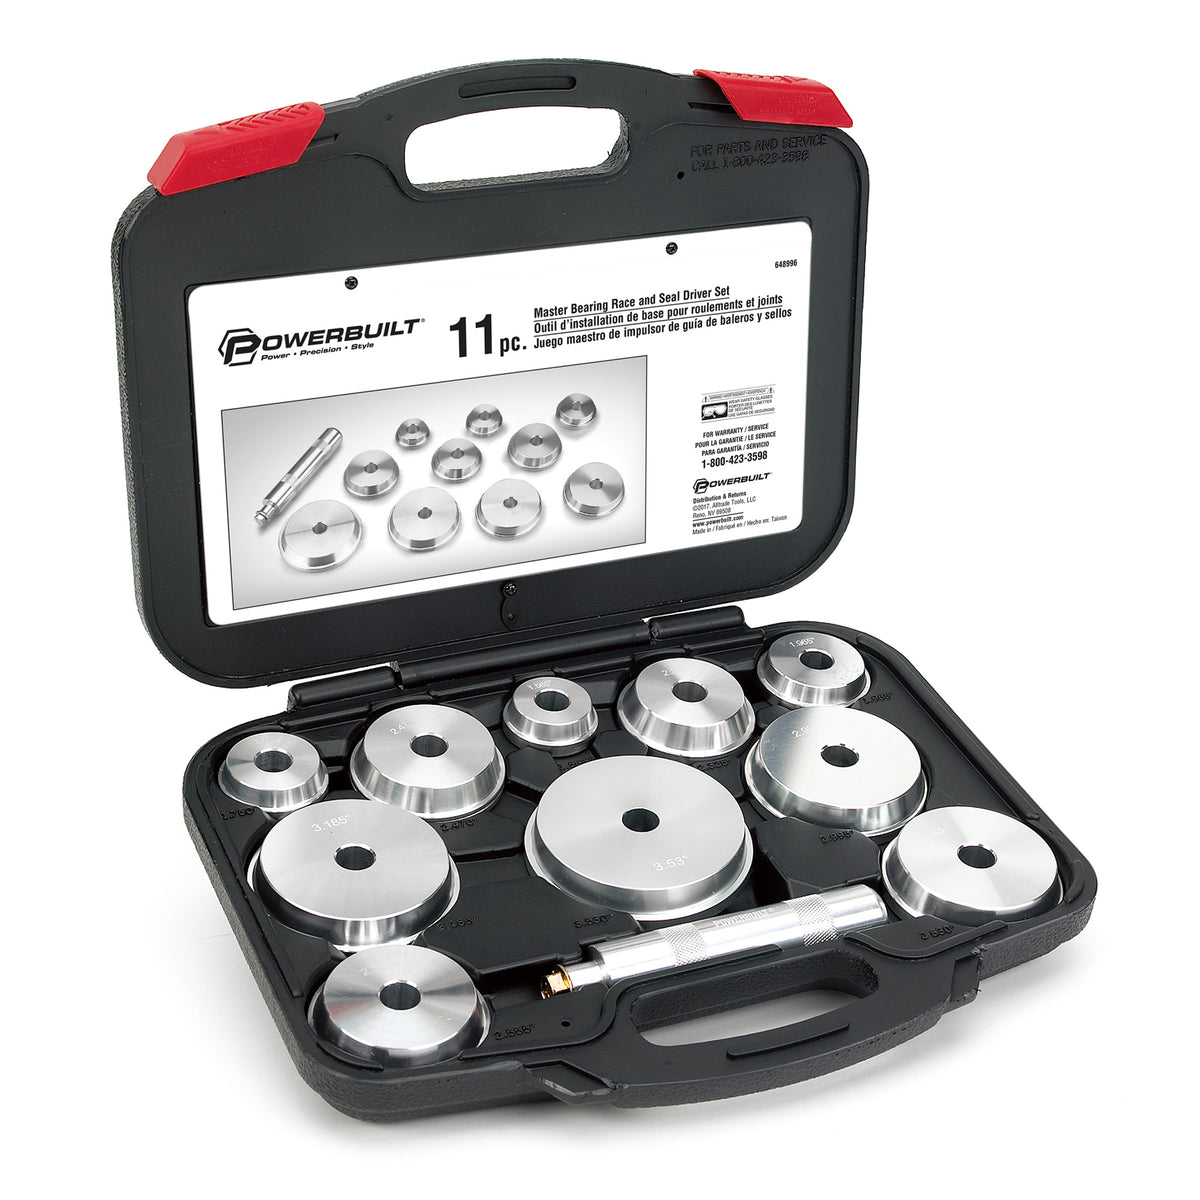  OEMTOOLS 27205 23 Piece Front Wheel Bearing Removal Kit, FWD Wheel  Bearing Press Kit, 23 Part Bearing Puller Set, Bearing Puller Kit with  Storage Case : Automotive